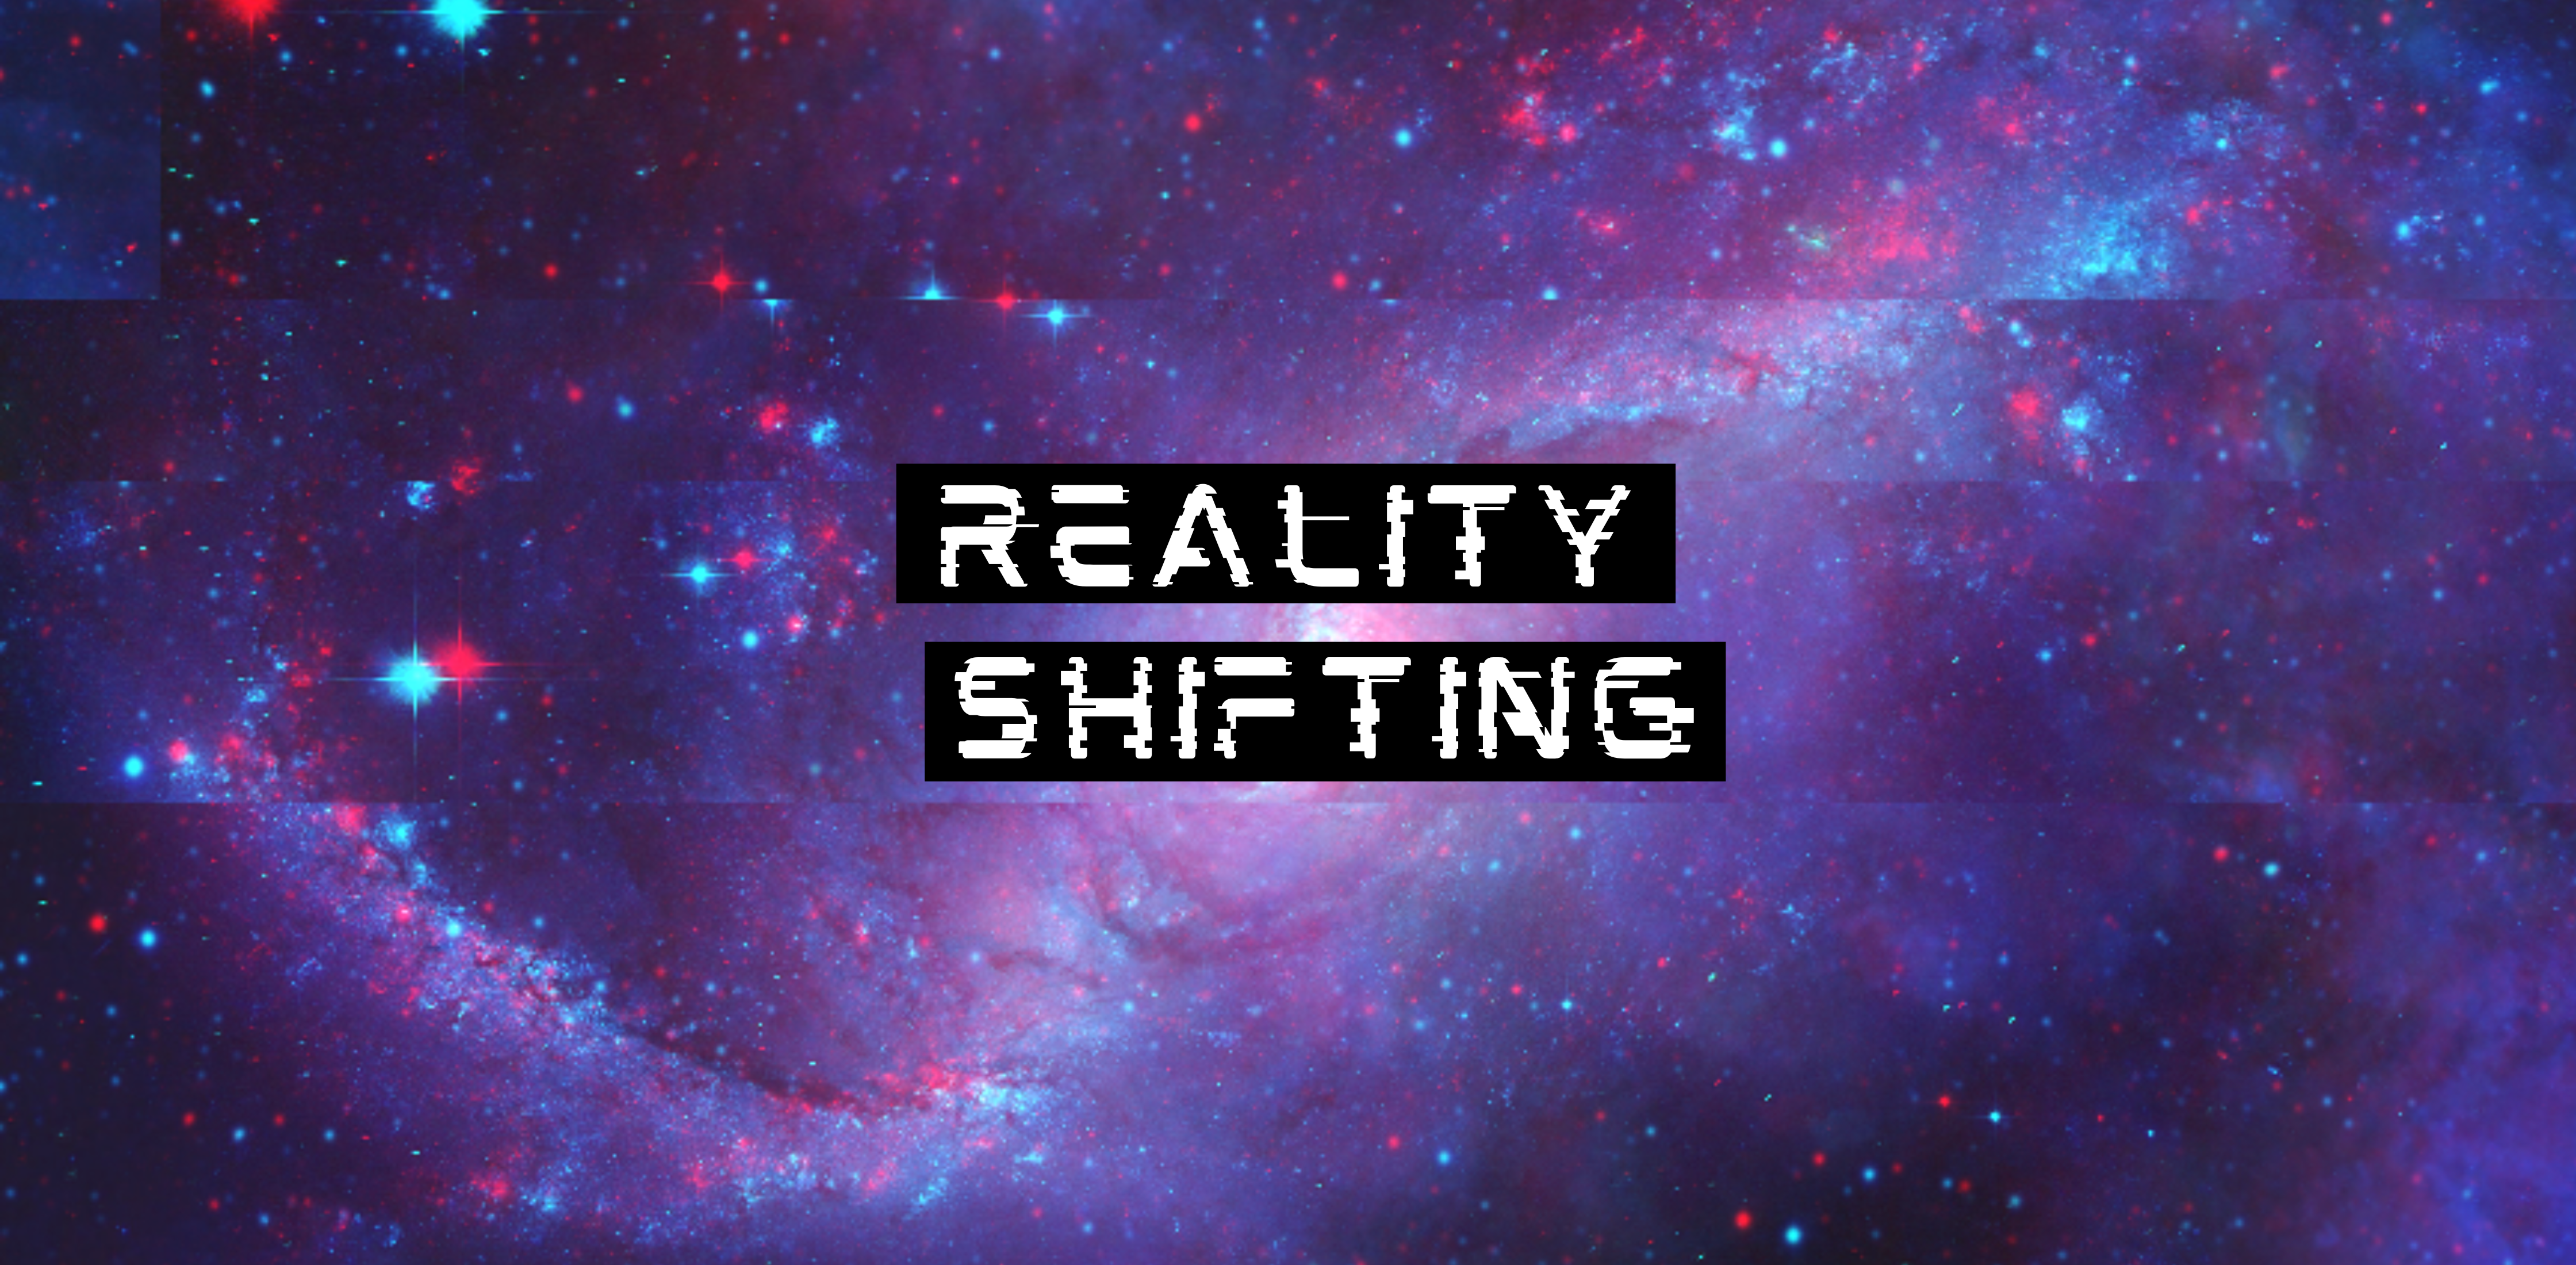 Reality shifting title on galaxy background